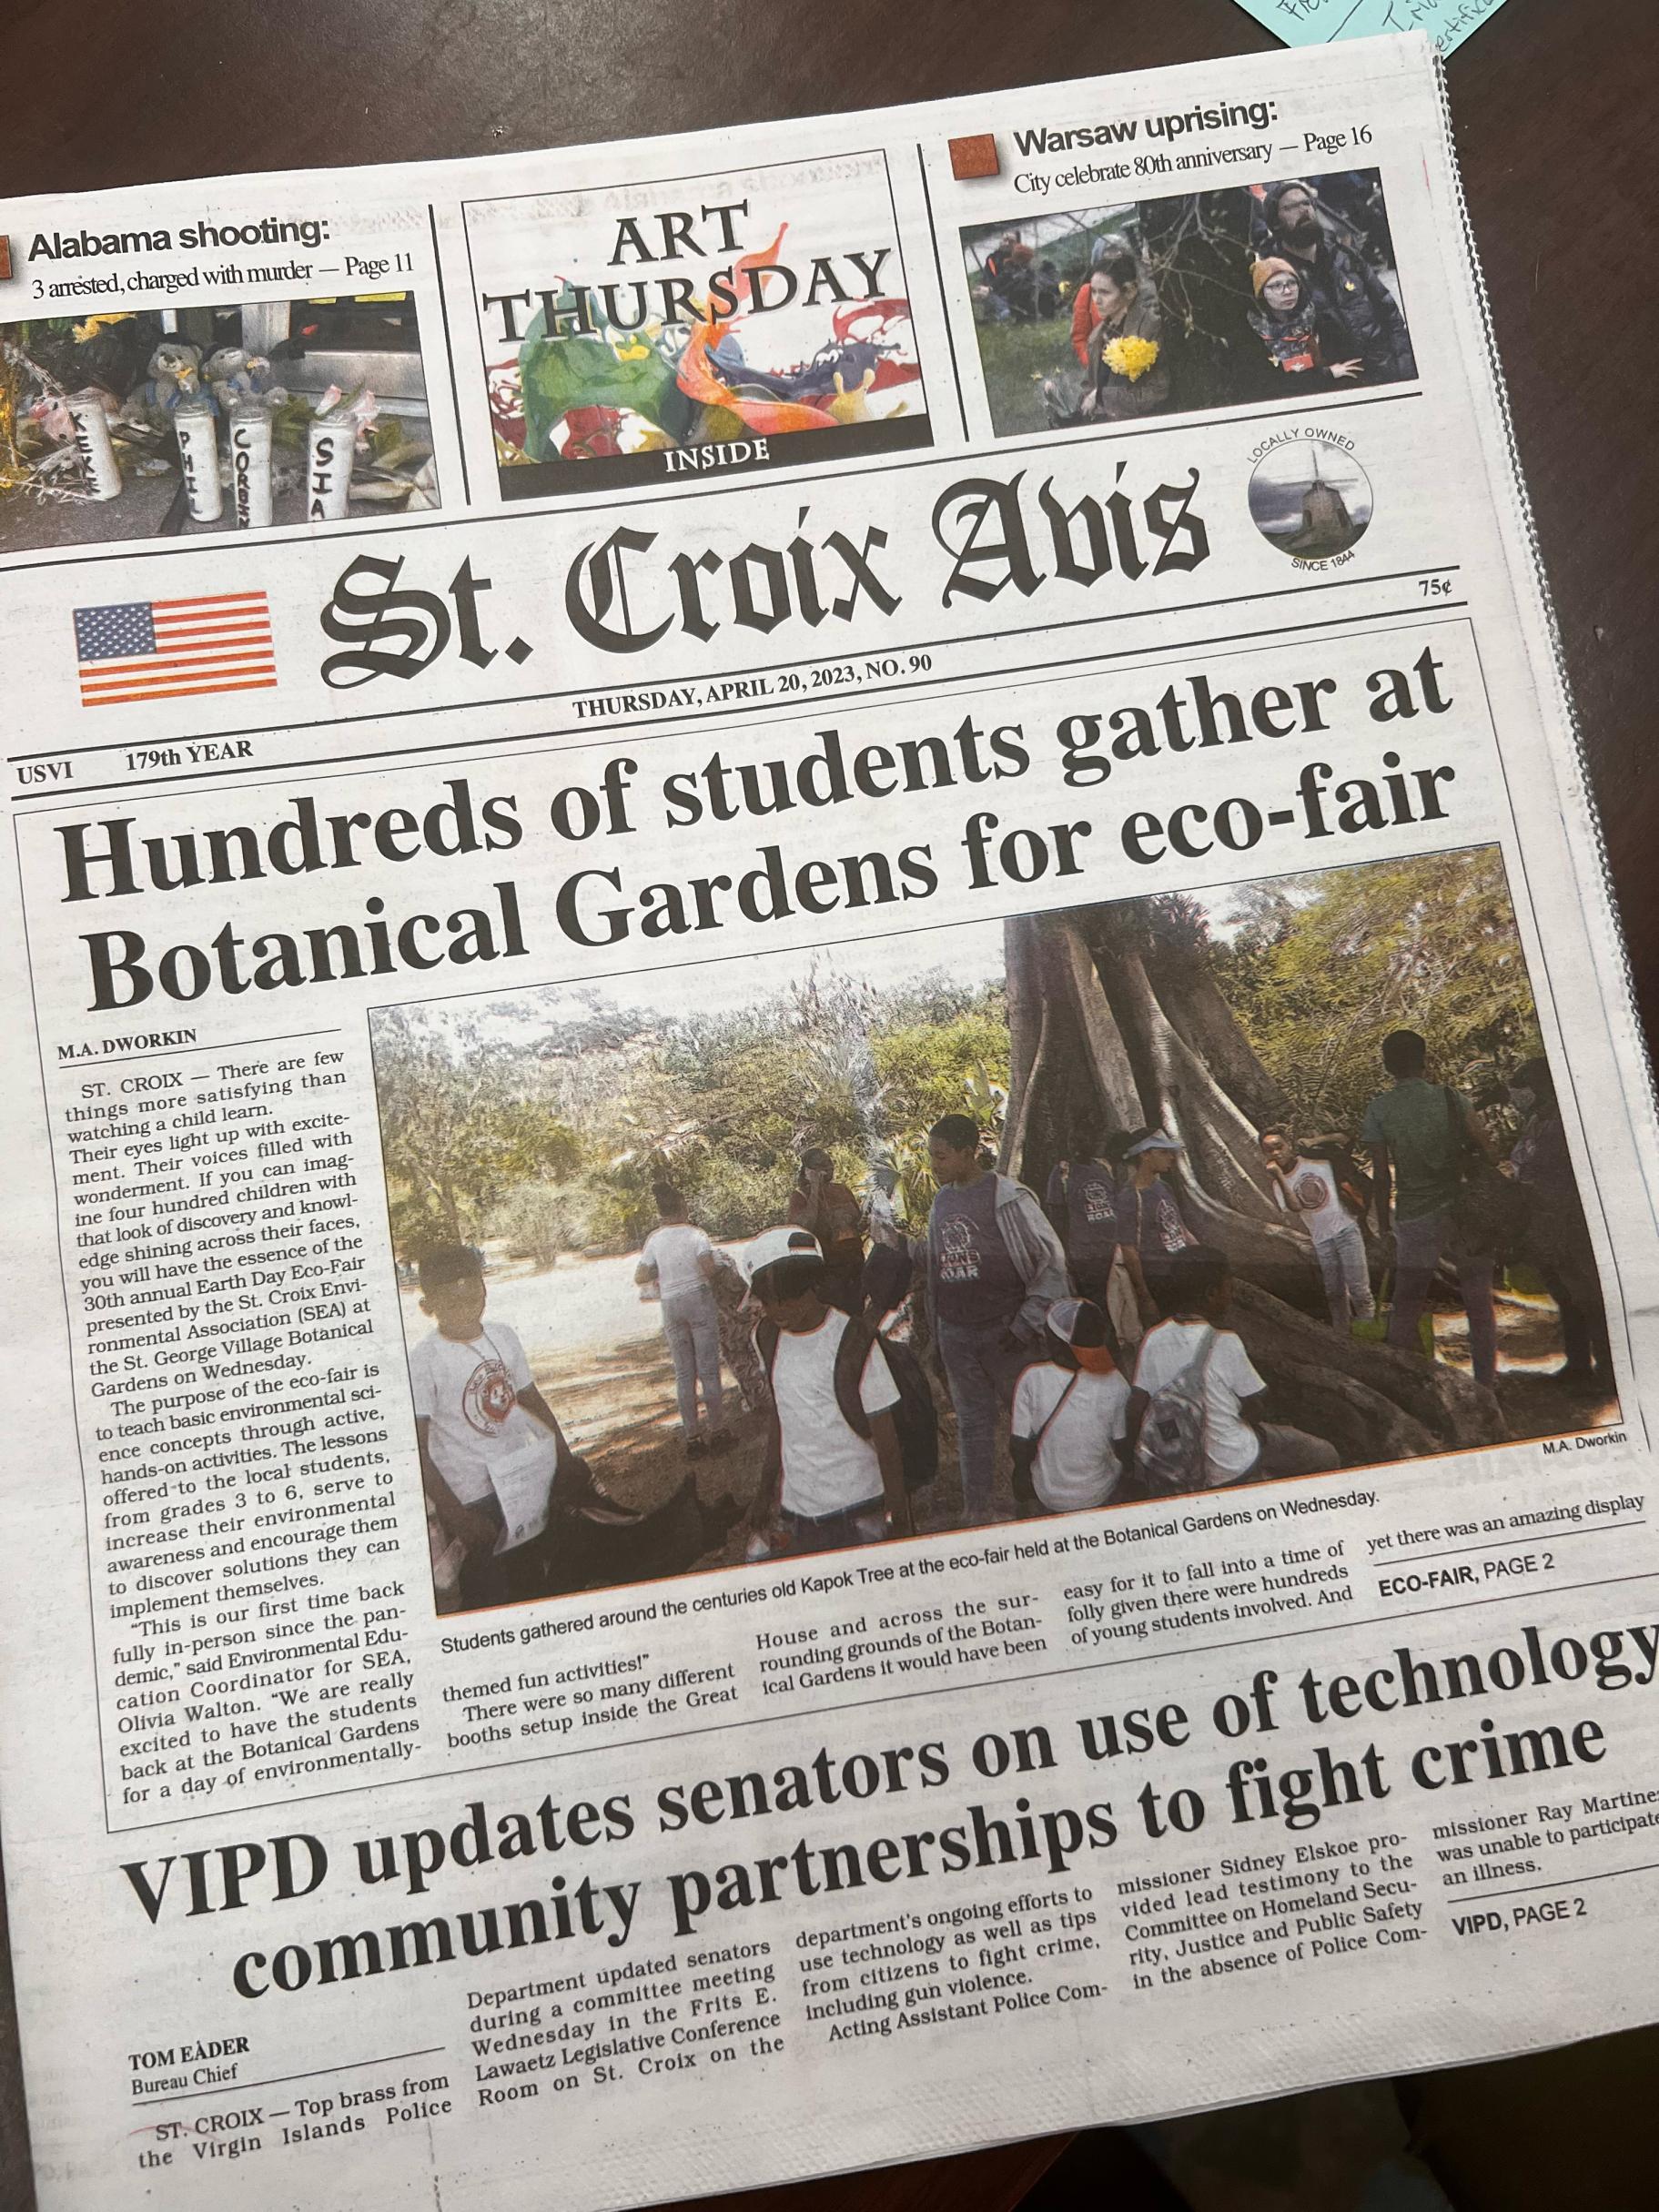 A photo of the front page of the St. Croix Avis newspaper featuring a story about the Eco Fair